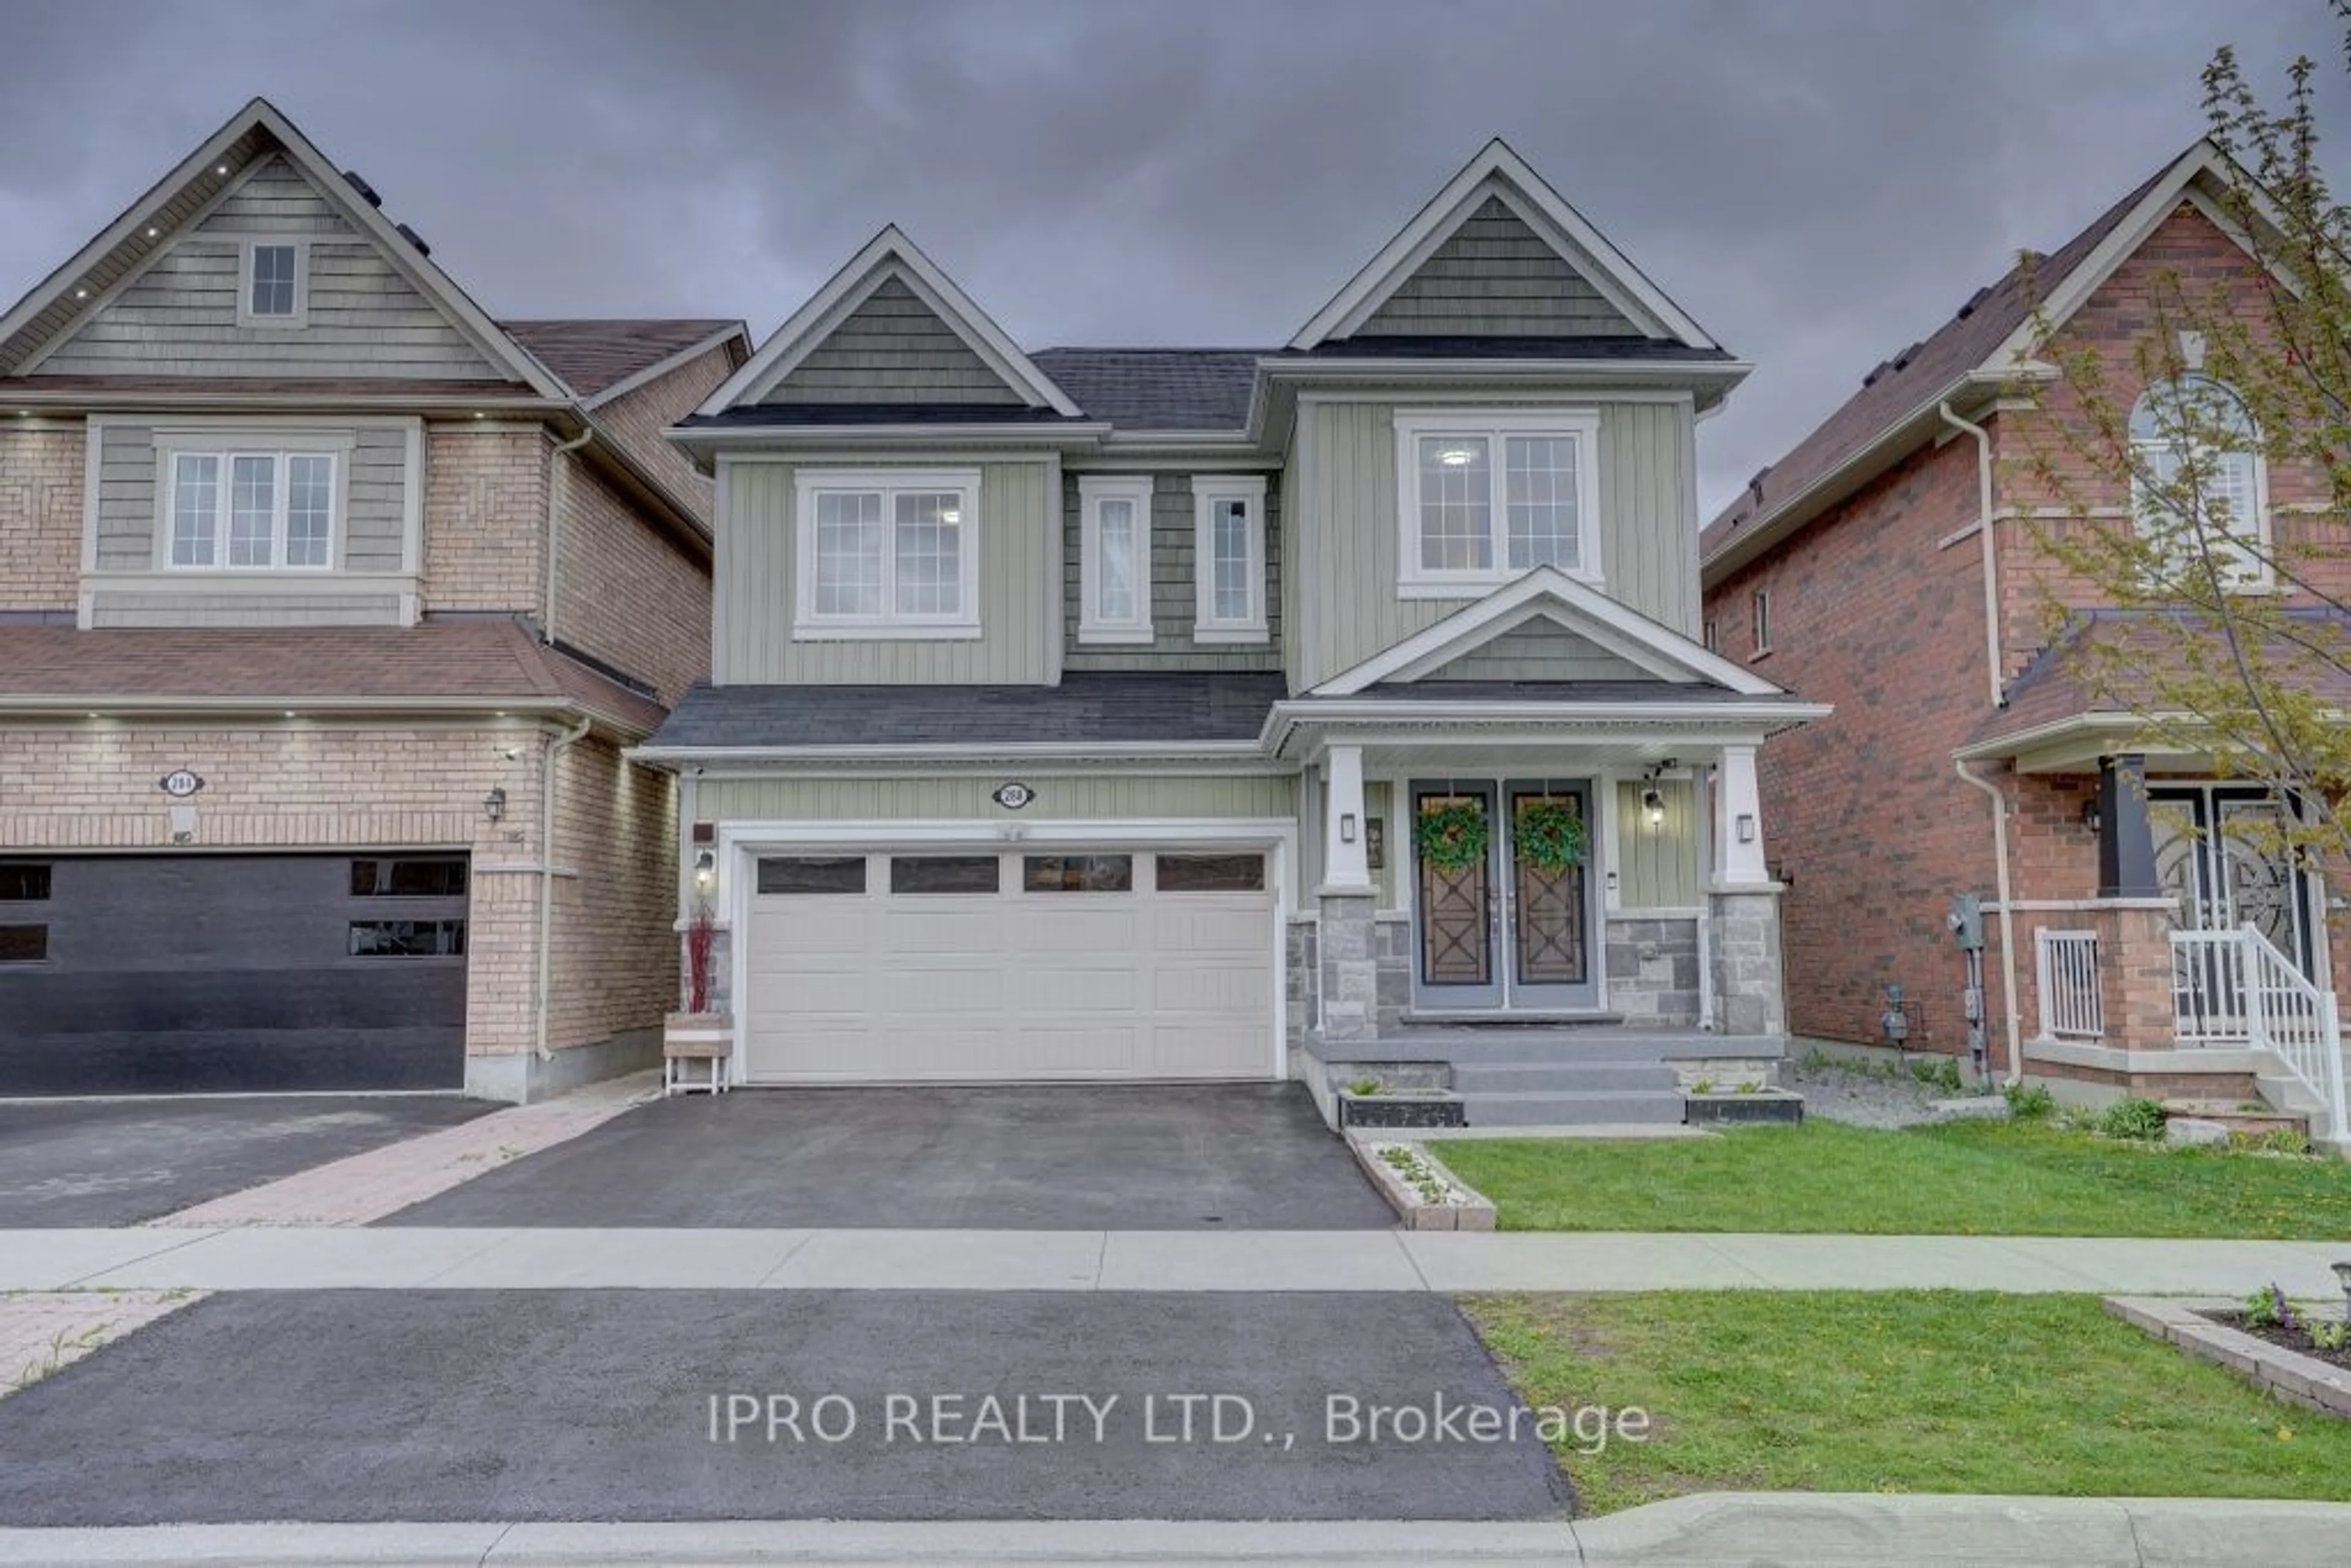 Frontside or backside of a home for 288 Pimlico Dr, Oshawa Ontario L1L 0L3